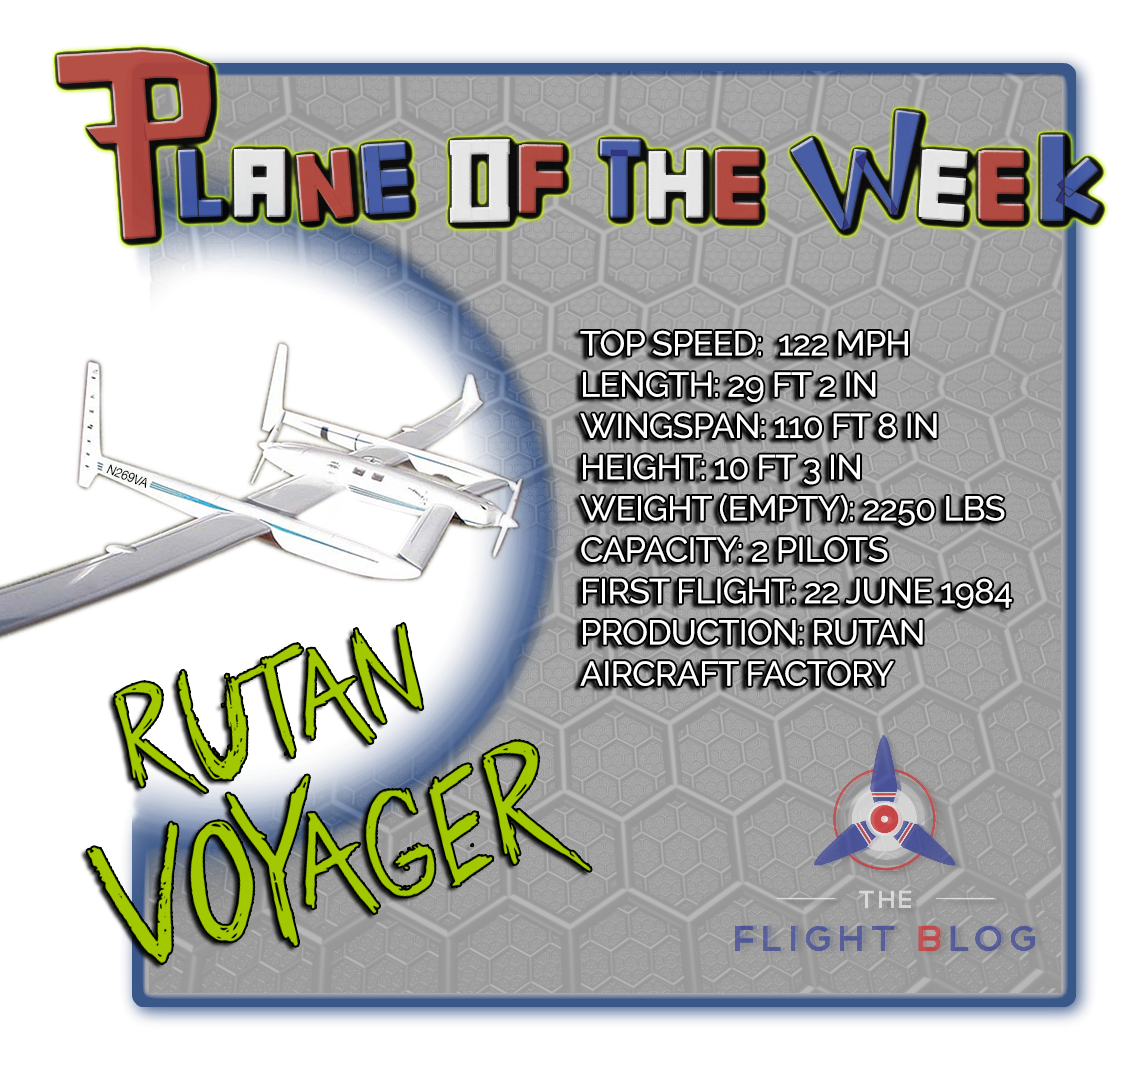 rutan voyager, the flight blog, plane of the week, aviation oil outlet, plane specs